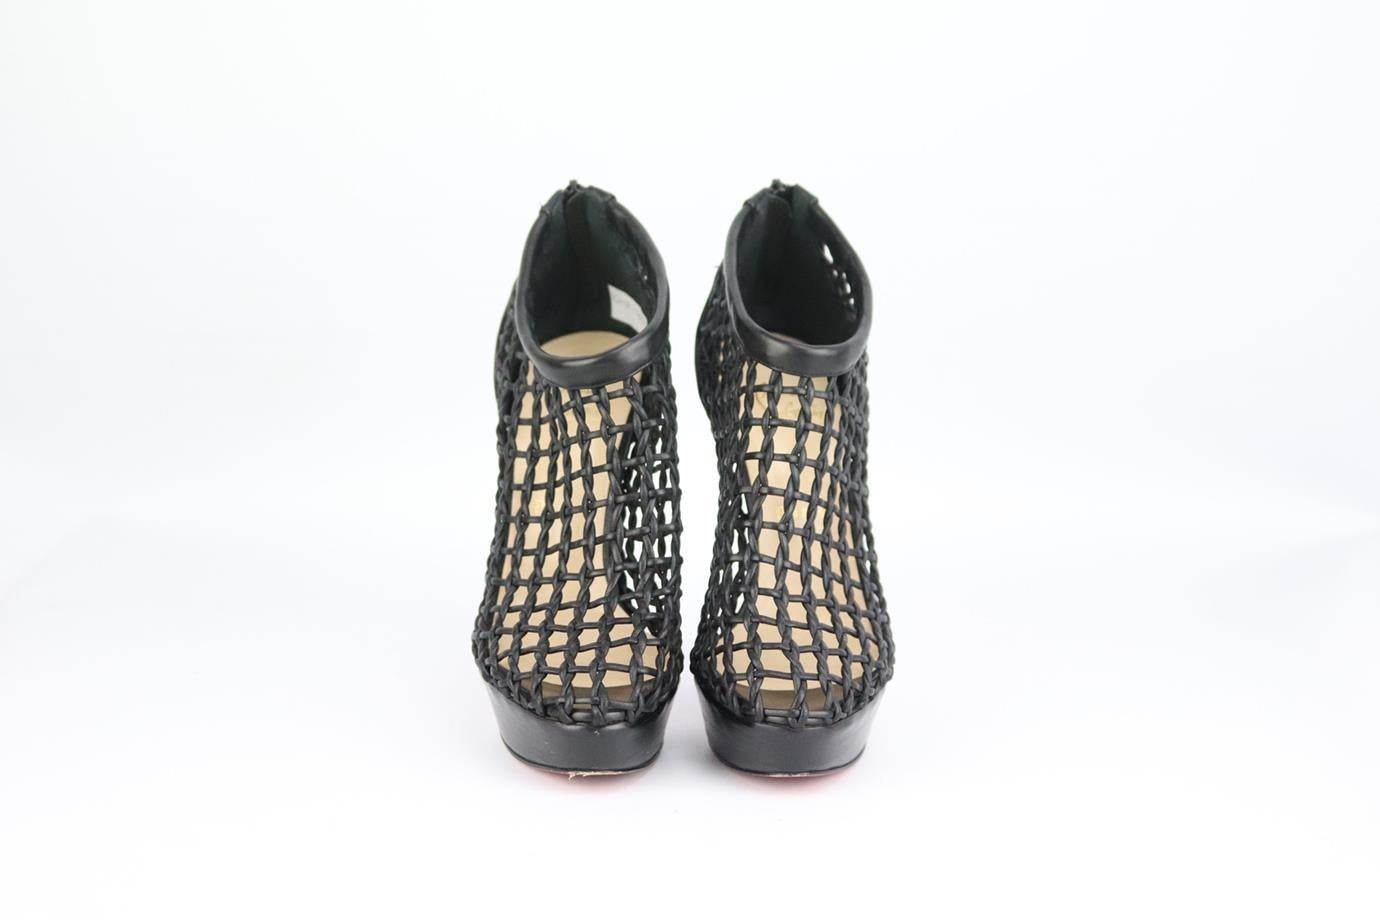 Christian Louboutin woven leather platform ankle boots. Made from black leather with woven cutout detail and set on the brand’s iconic red sole. Black. Zip fastening at back. Does not come with box or dustbag. Size: EU 38 (UK 5, US 8). Insole: 9.3